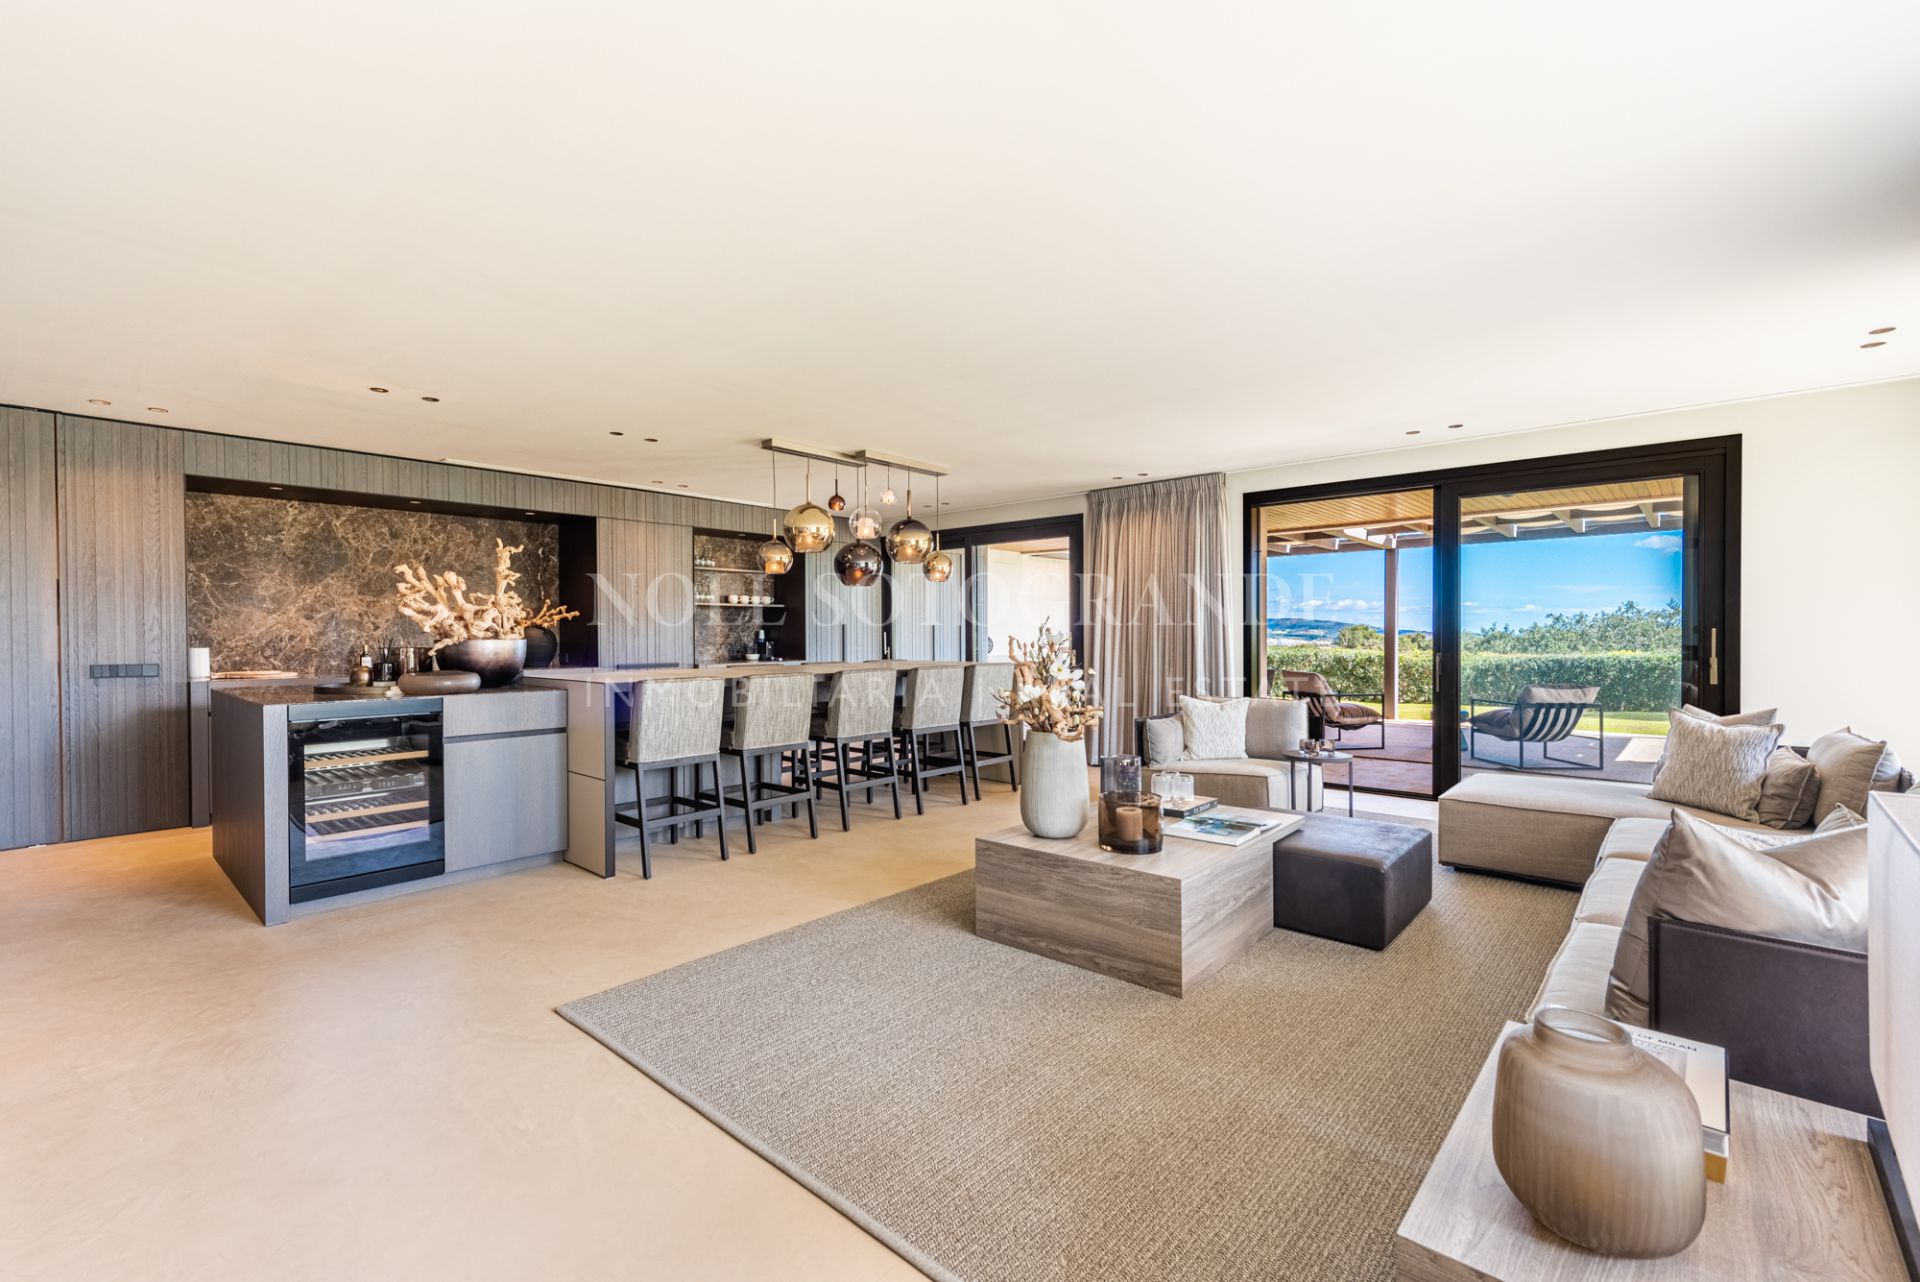 Depersonalized living room - kitchen area of a luxury home for sale in Sotogrande